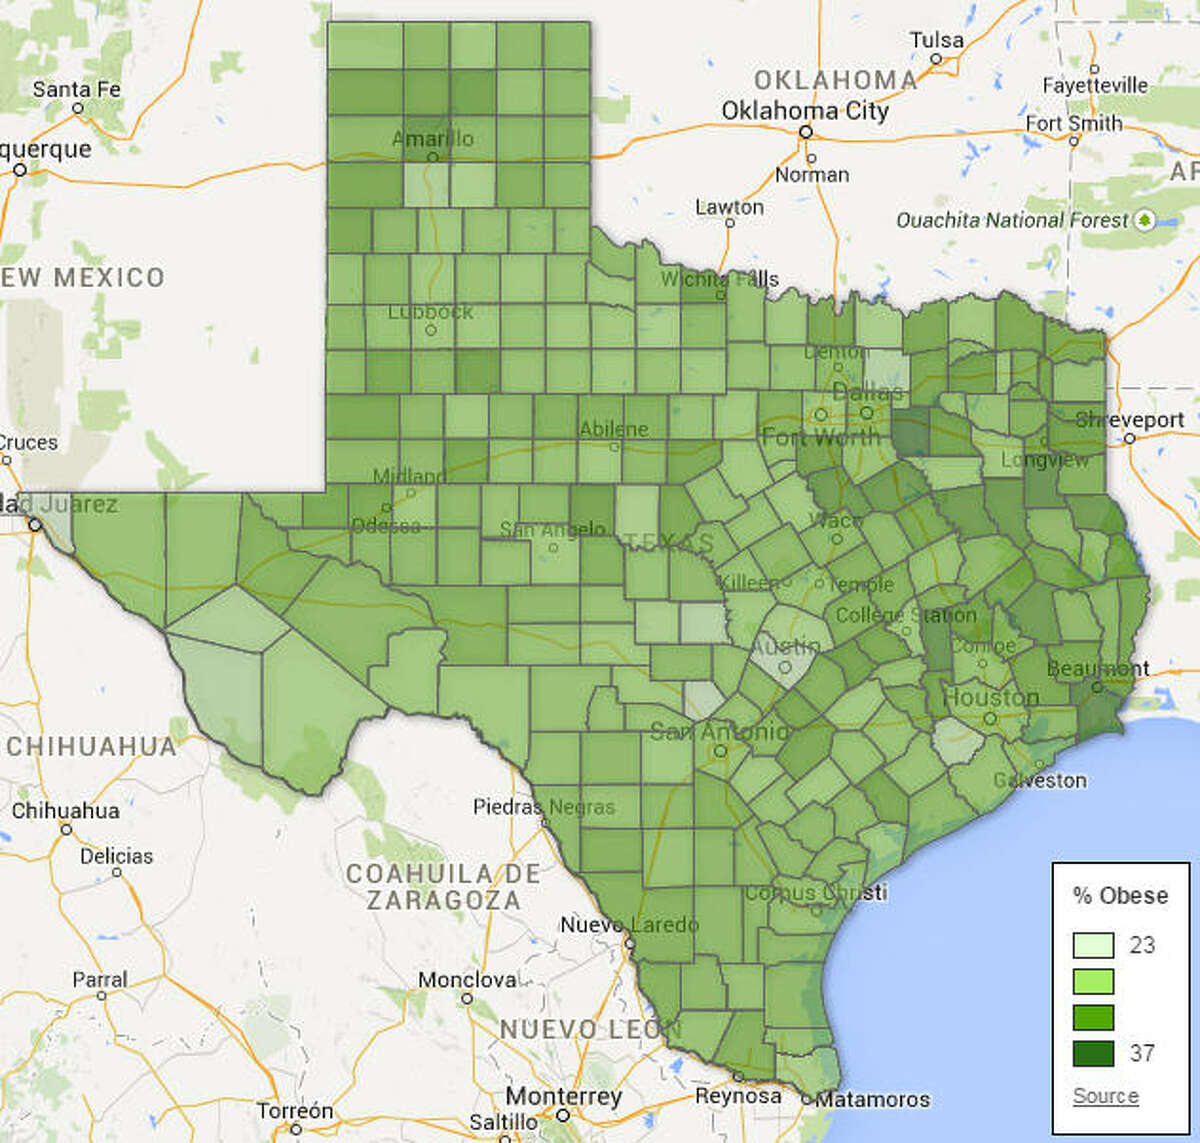 See the most and least obese counties in Texas.